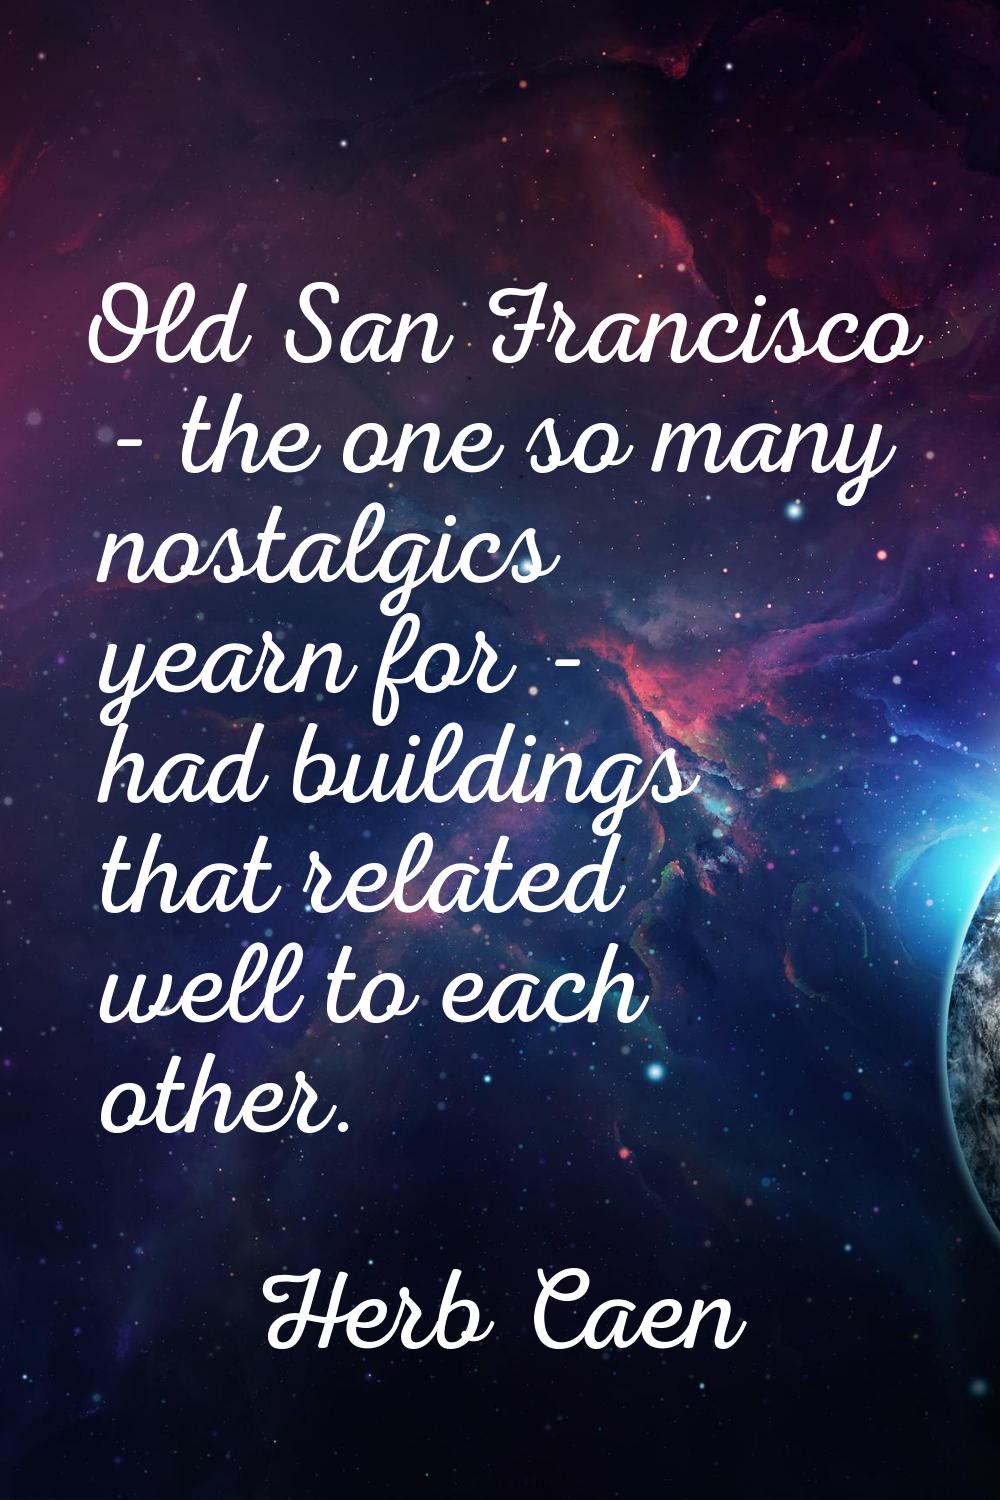 Old San Francisco - the one so many nostalgics yearn for - had buildings that related well to each 